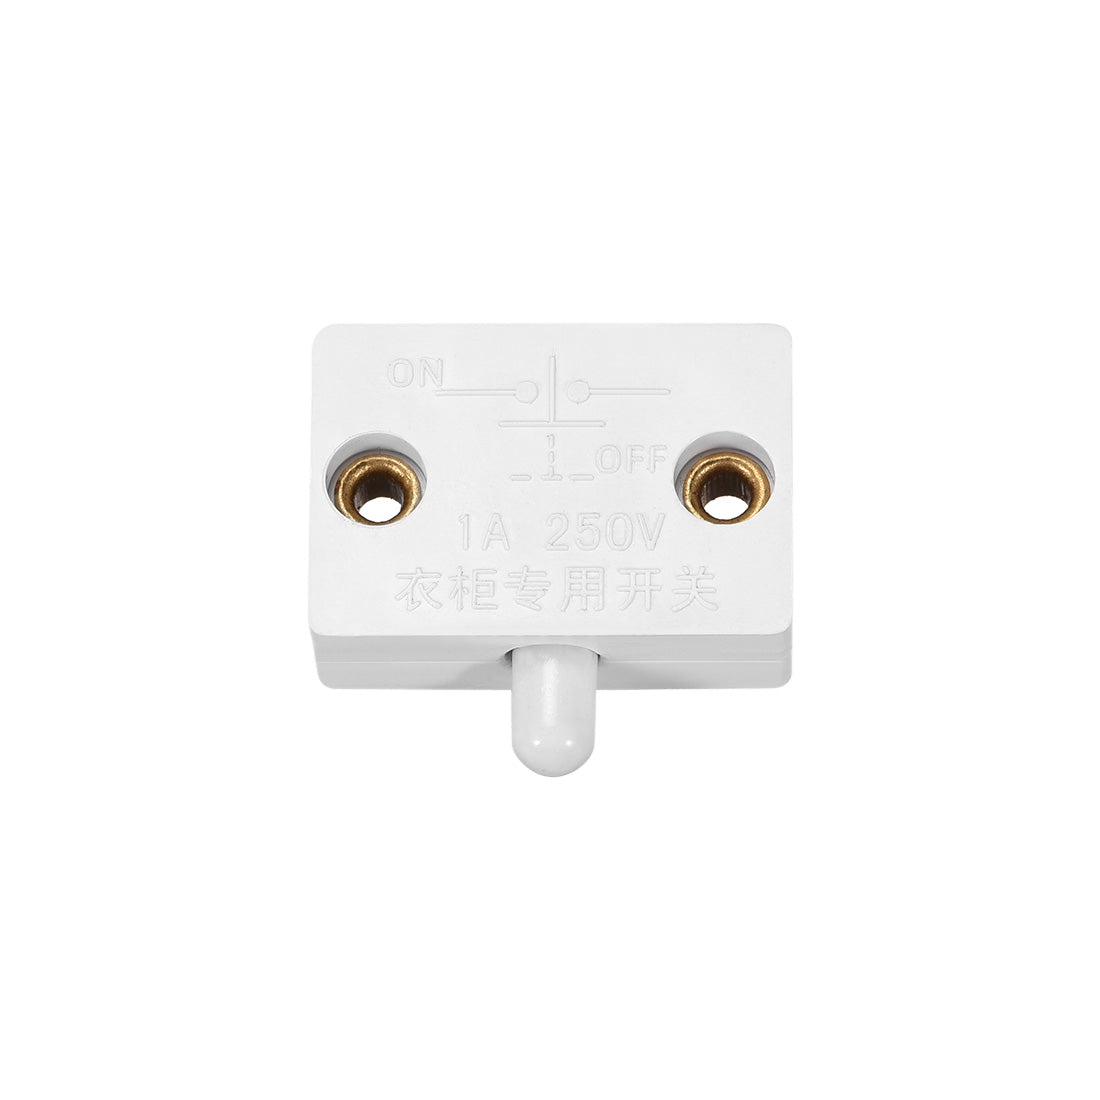 uxcell Uxcell Wardrobe Door Light Switch Momentary Cabinet Closet Switch Normally Closed 110-250V 1A White 4 Pcs